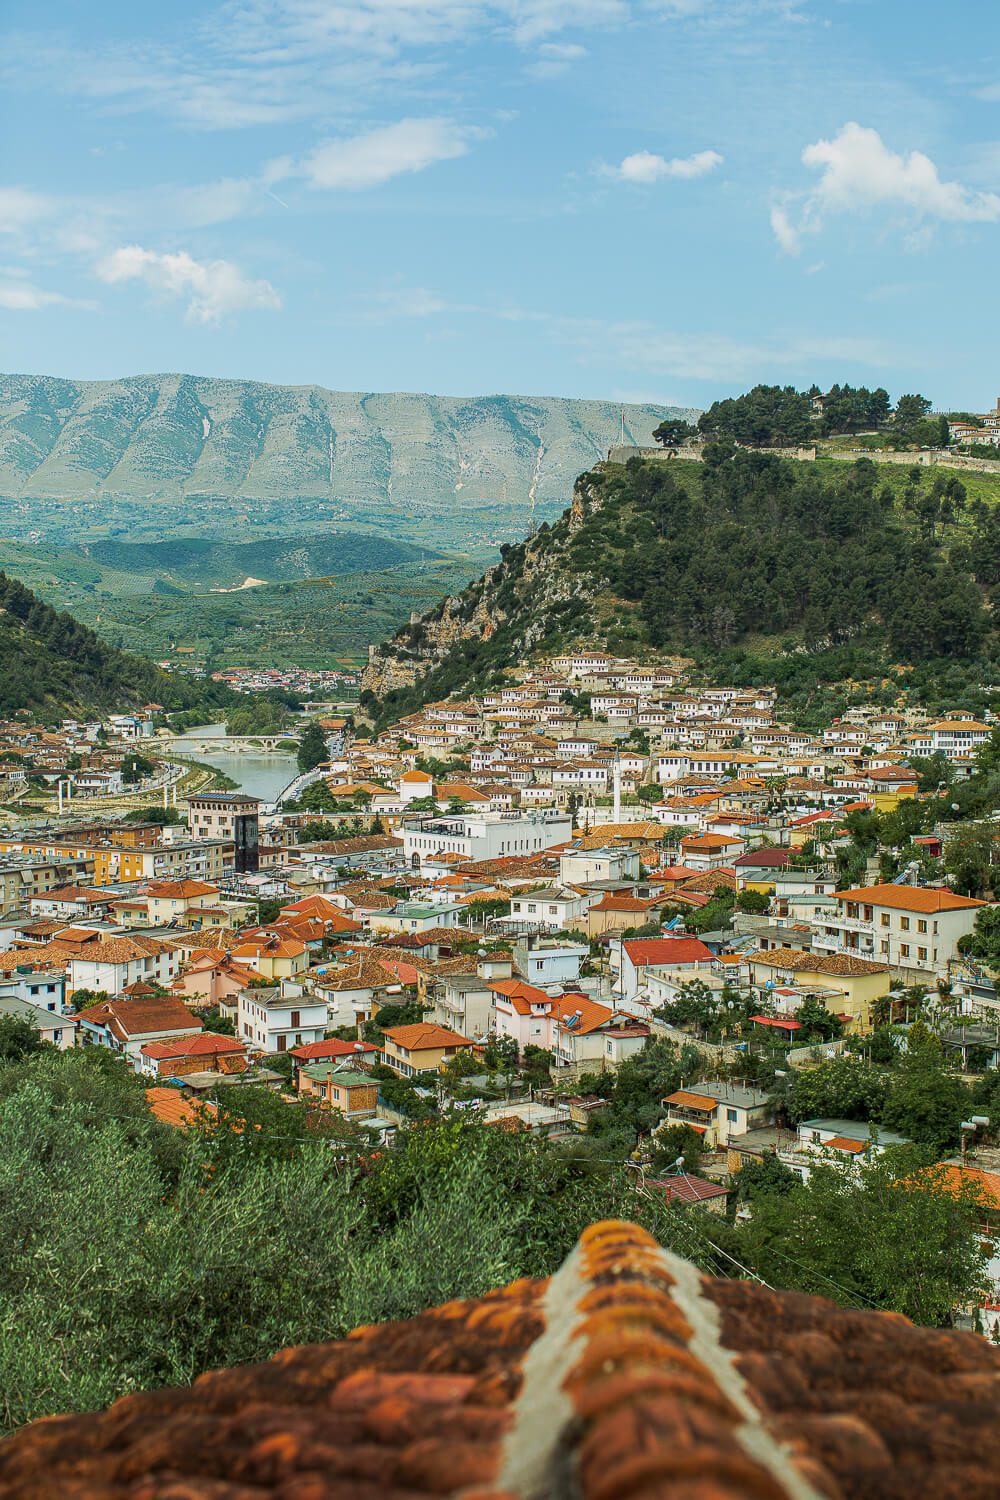 View of Berat from Above